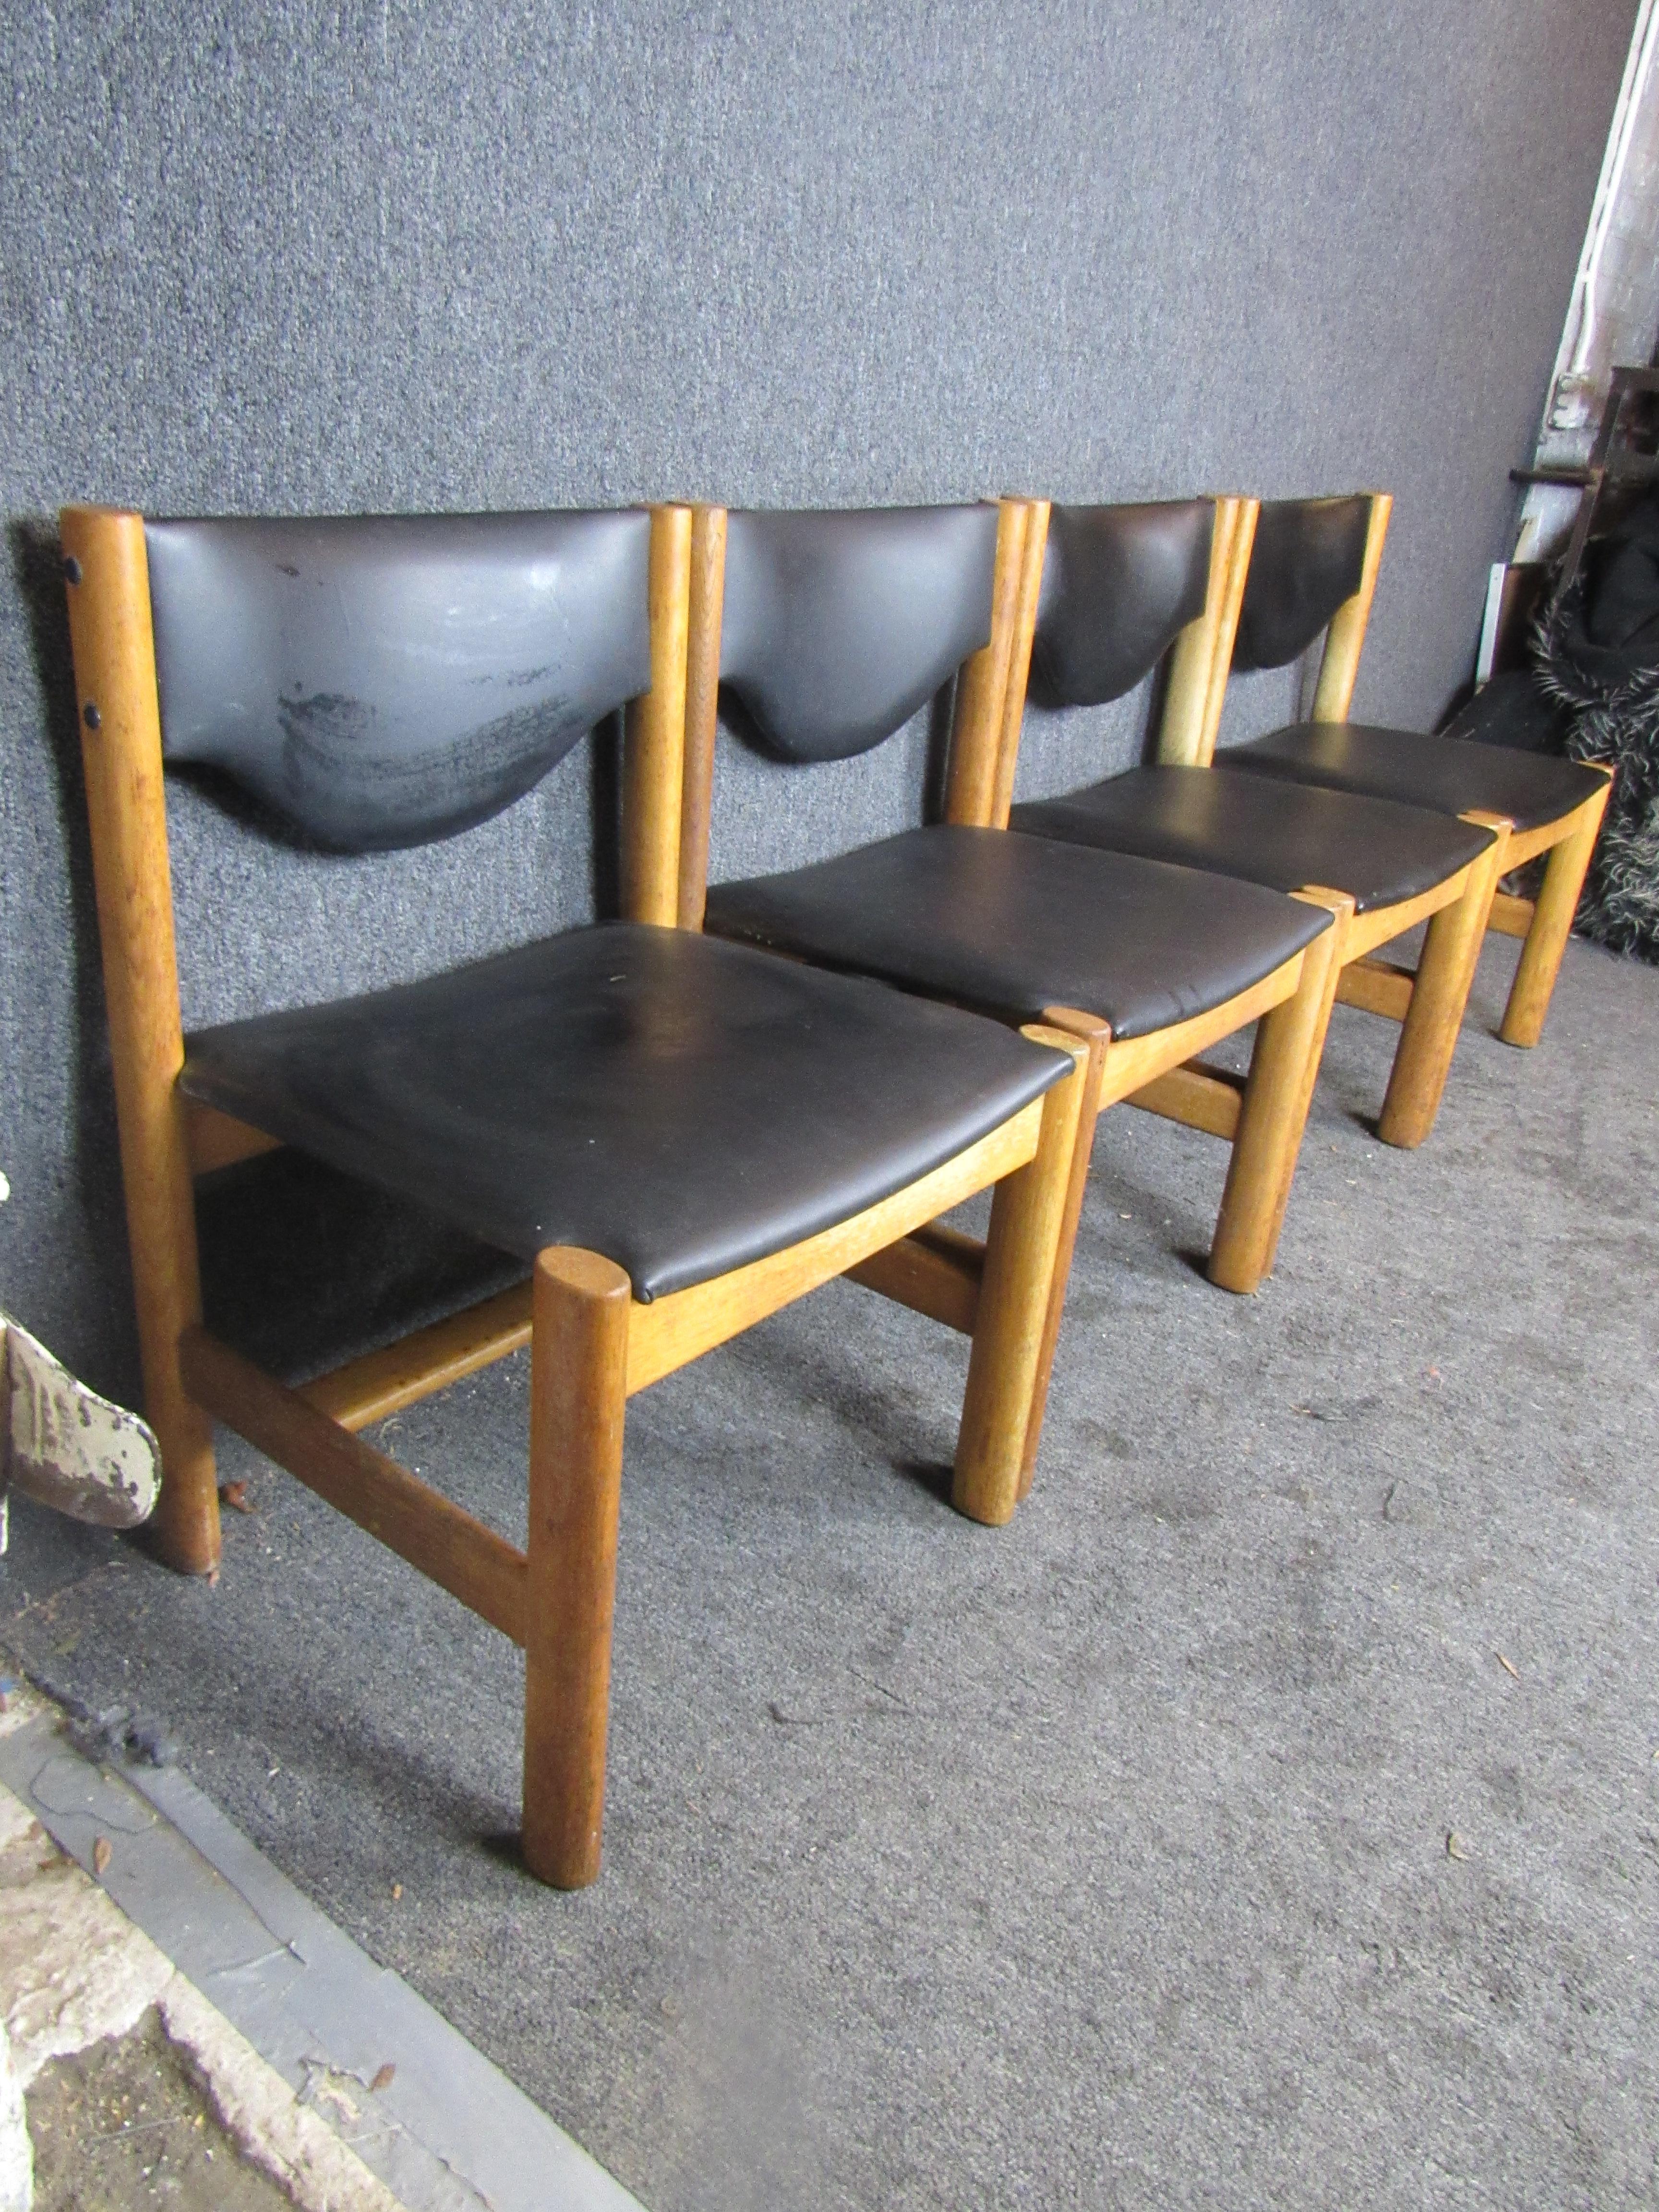 Wonderful set of dining chairs built around chunky oak frames. With subtle brutalist style, these minimalist chairs are sure to blend in a wide variety of decor, in the home or office. 
Please confirm item pickup location (Brooklyn or New Jersey)